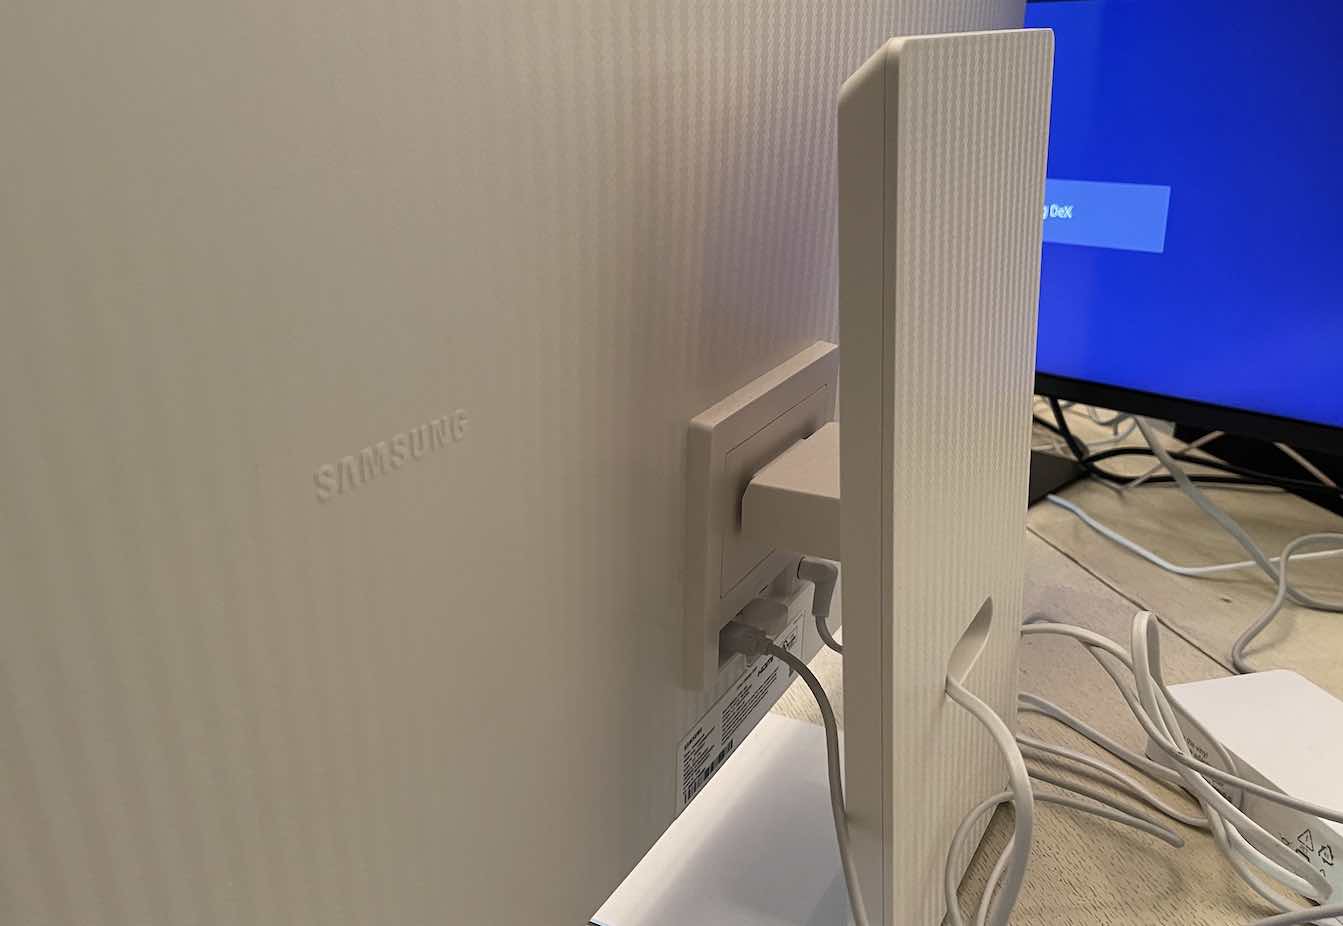 Samsung M8 smart monitor review